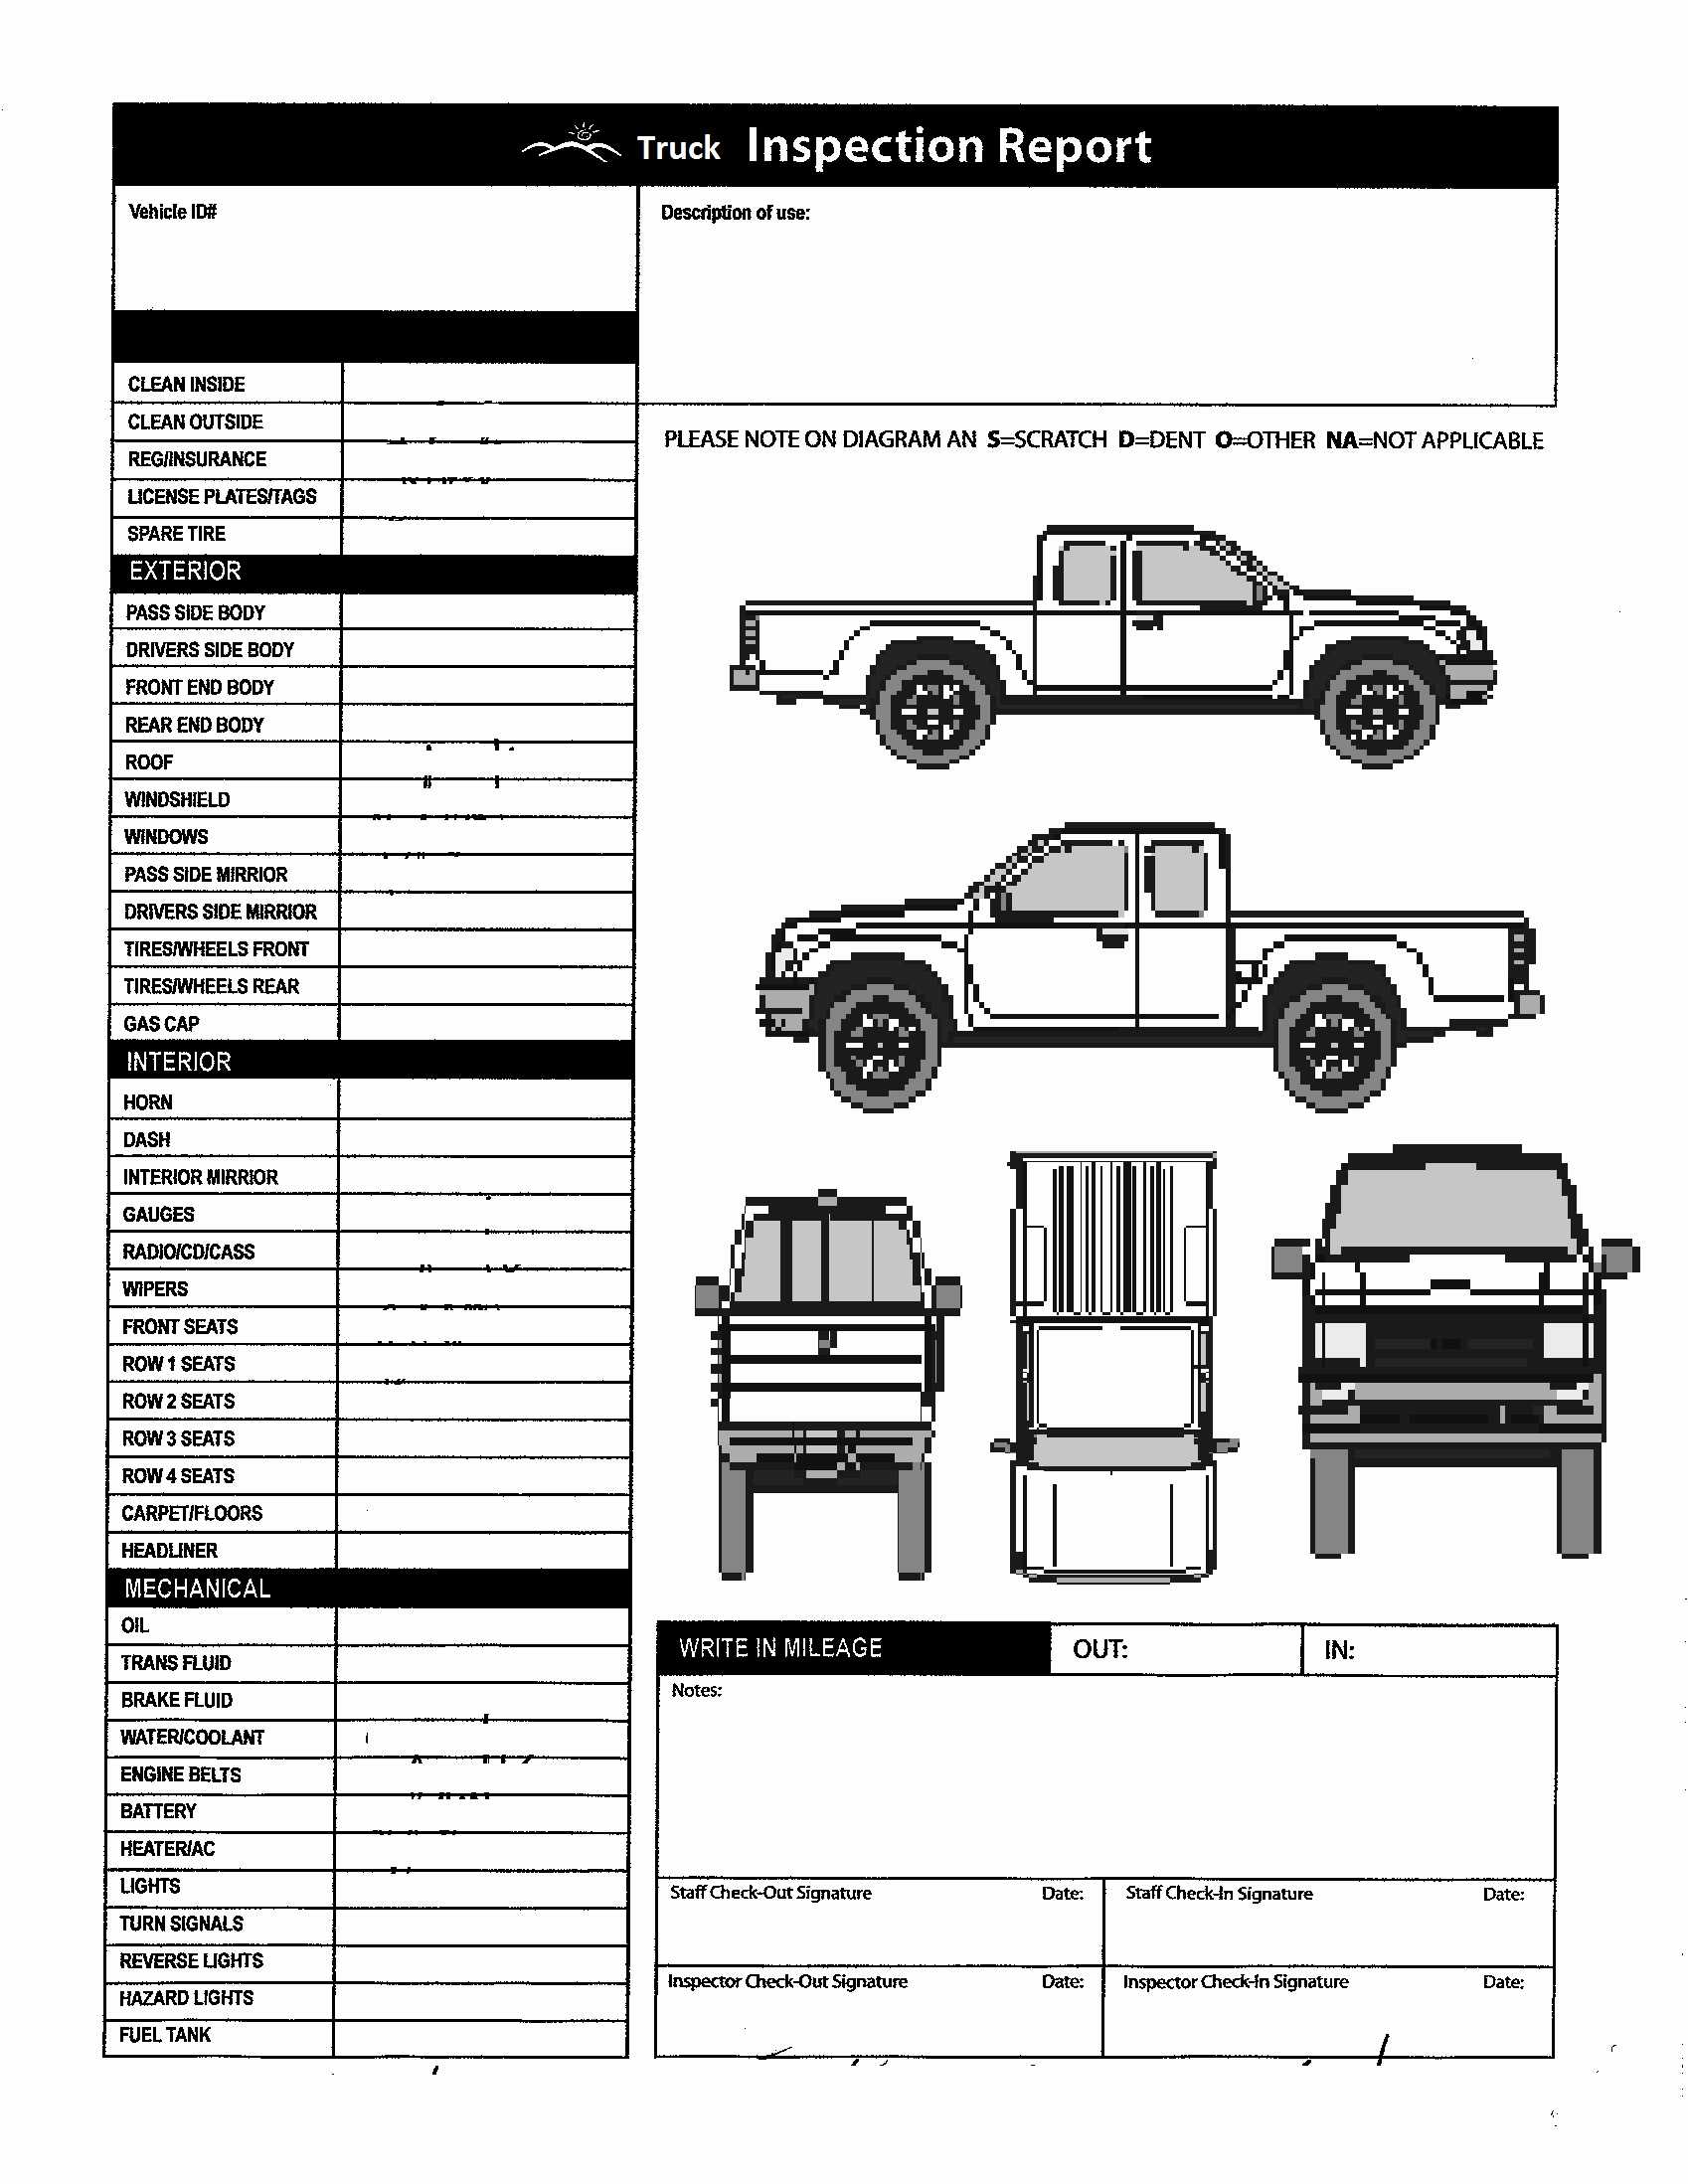 Inspection Spreadsheet Template Vehicle Checklist Excel With Regard To Vehicle Checklist Template Word